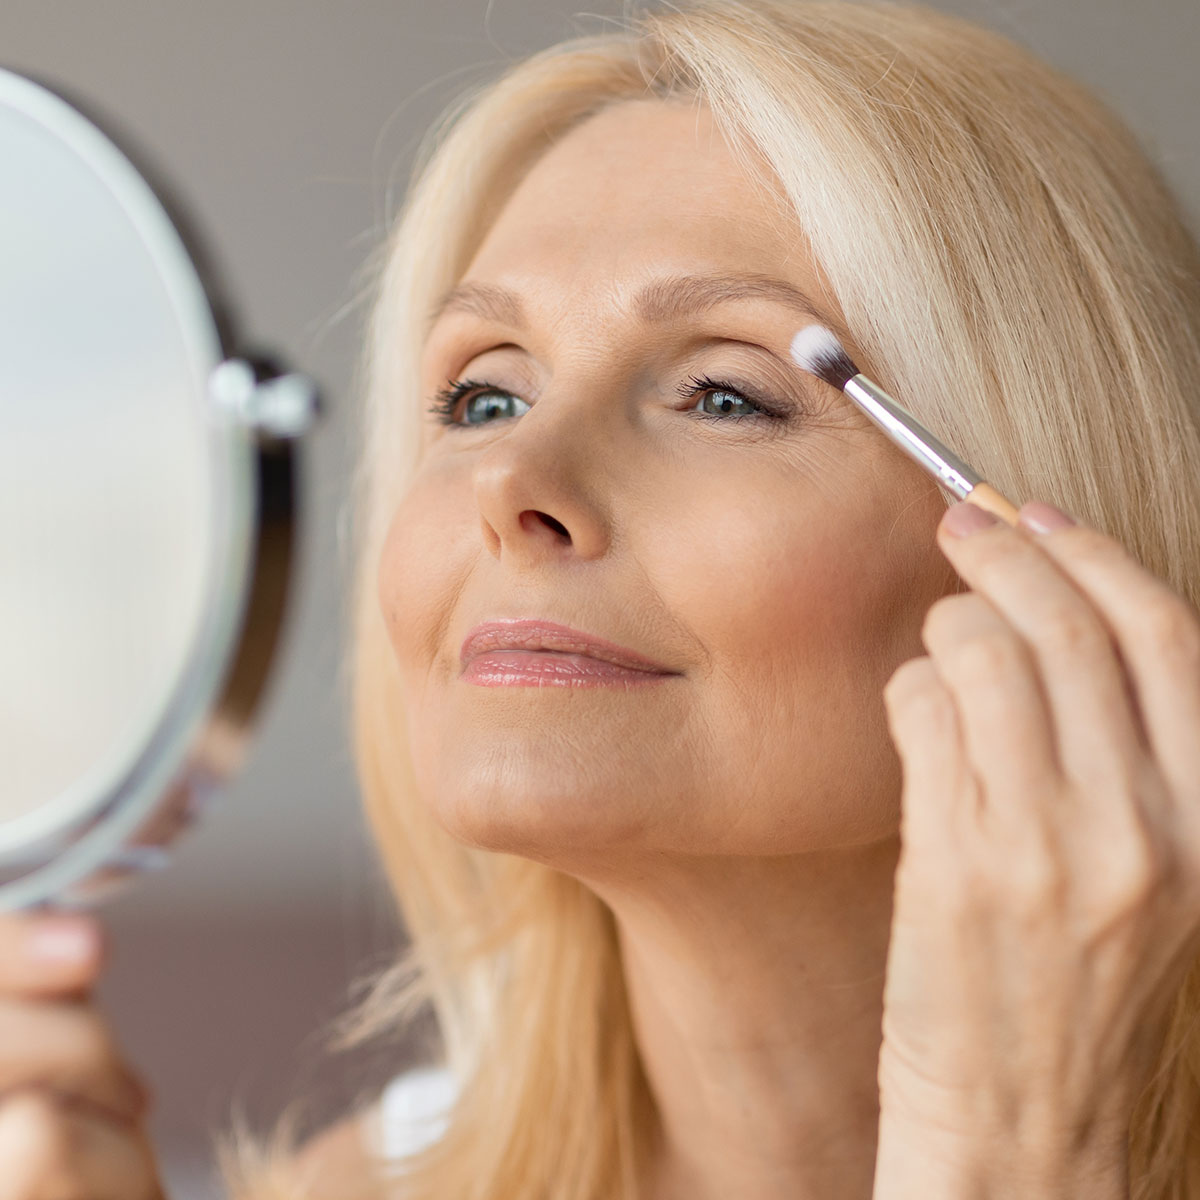 Celebrity Makeup Artists Say Women Over 50 Should Avoid This One